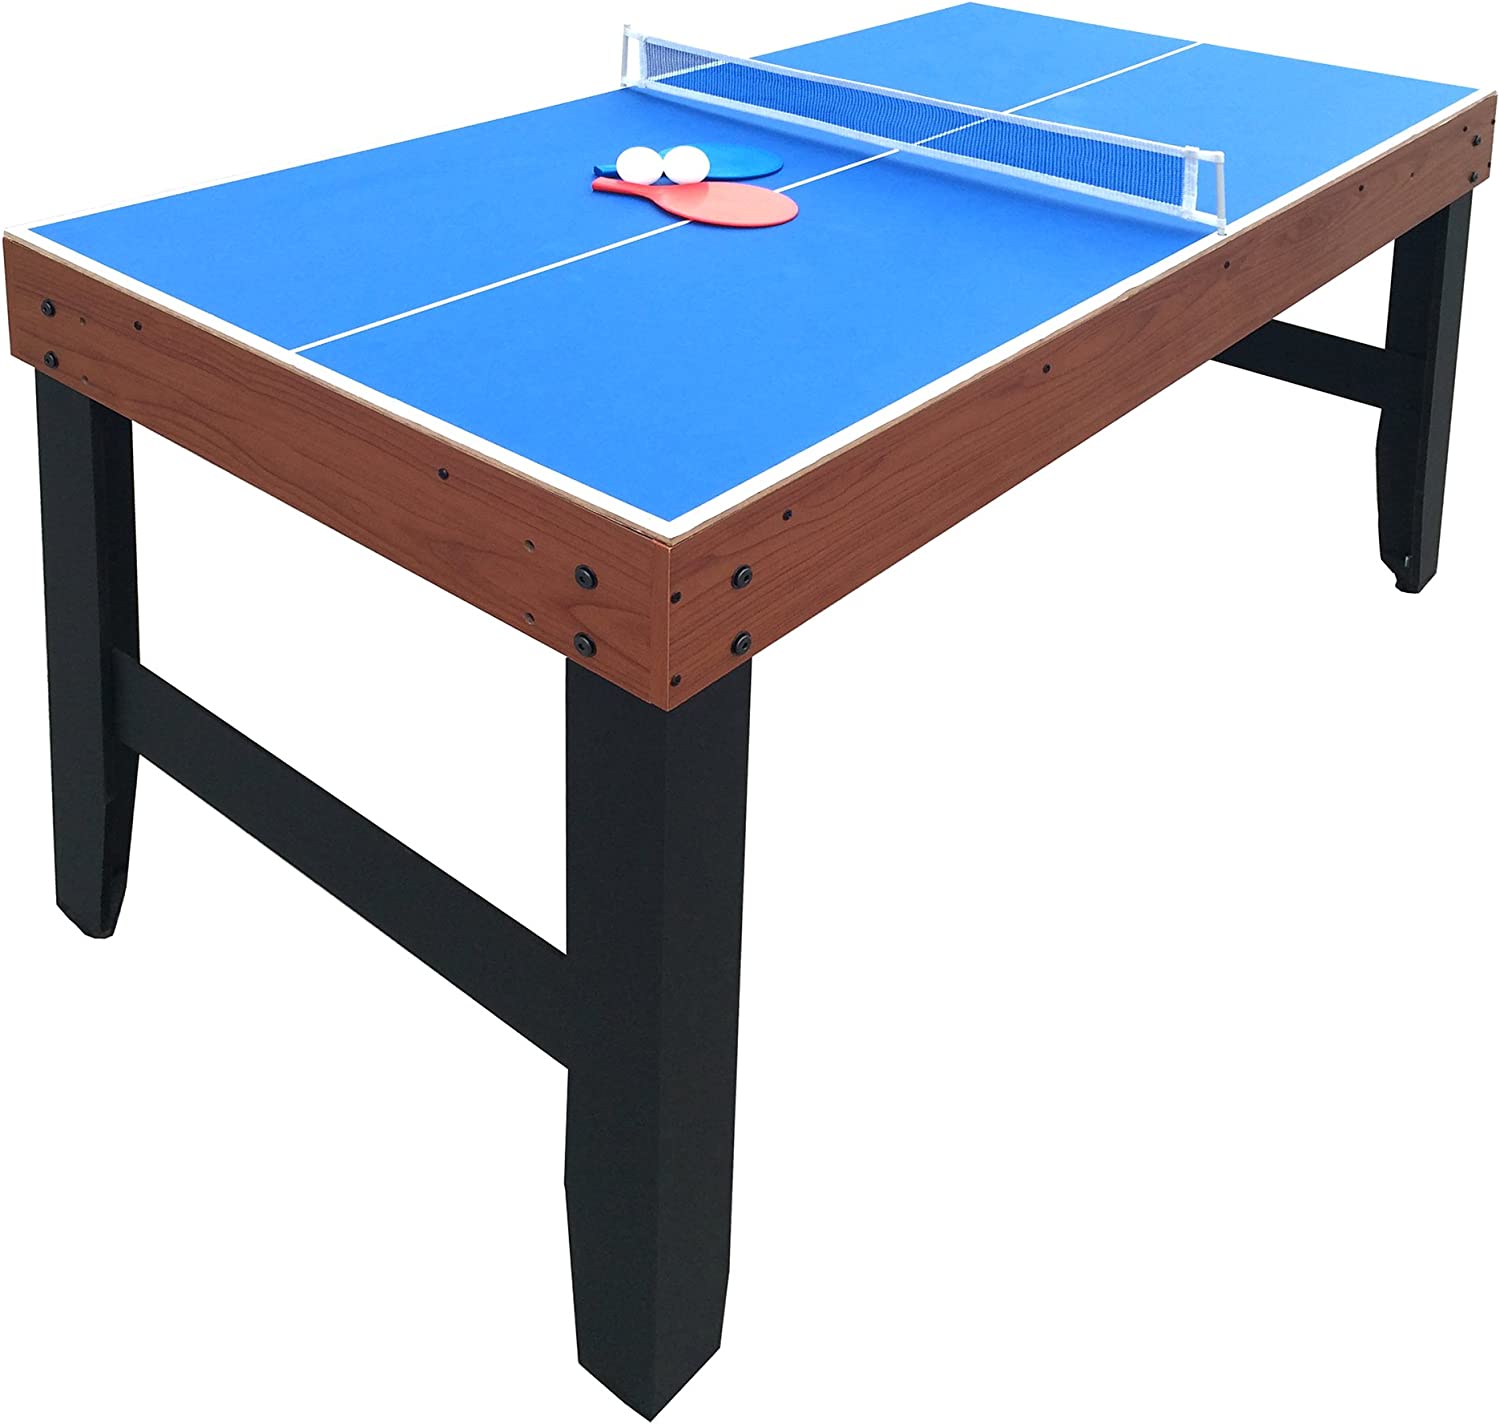 Hathaway Accelerator 4-in-1 Multi-Game Table with Basketball, Air Hockey, Table Tennis and Dry Erase Board for Kids and Families